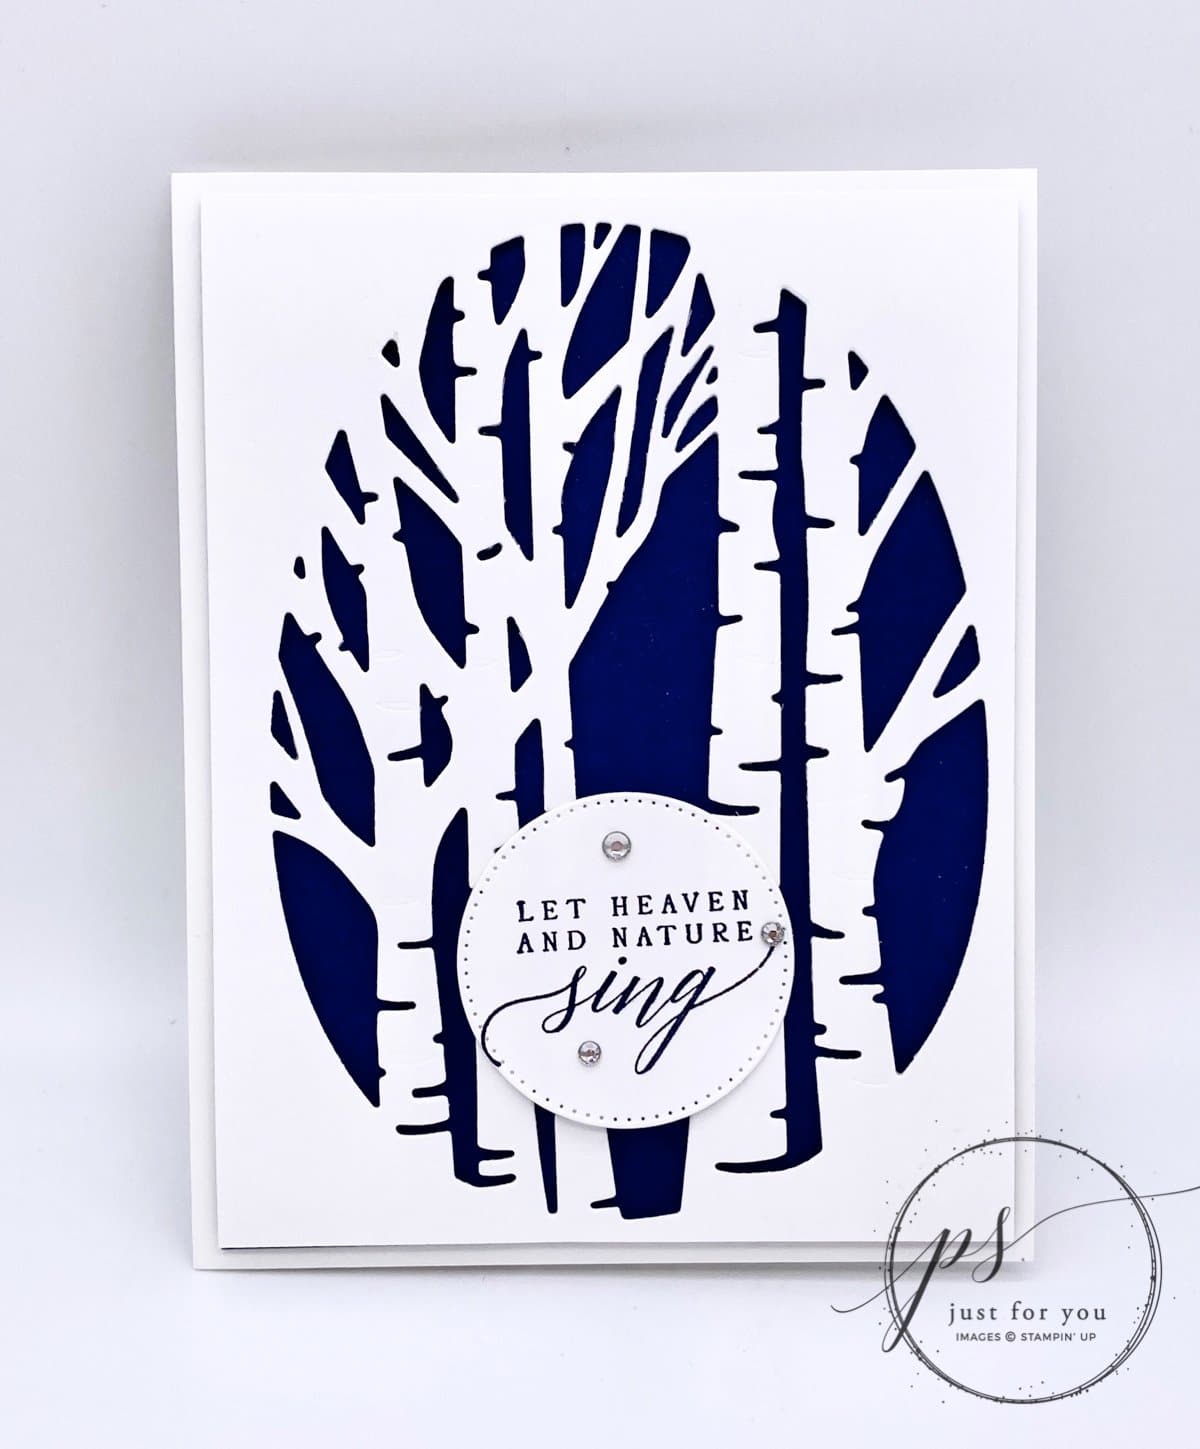 Stampin' up aspen tree dies for christmas